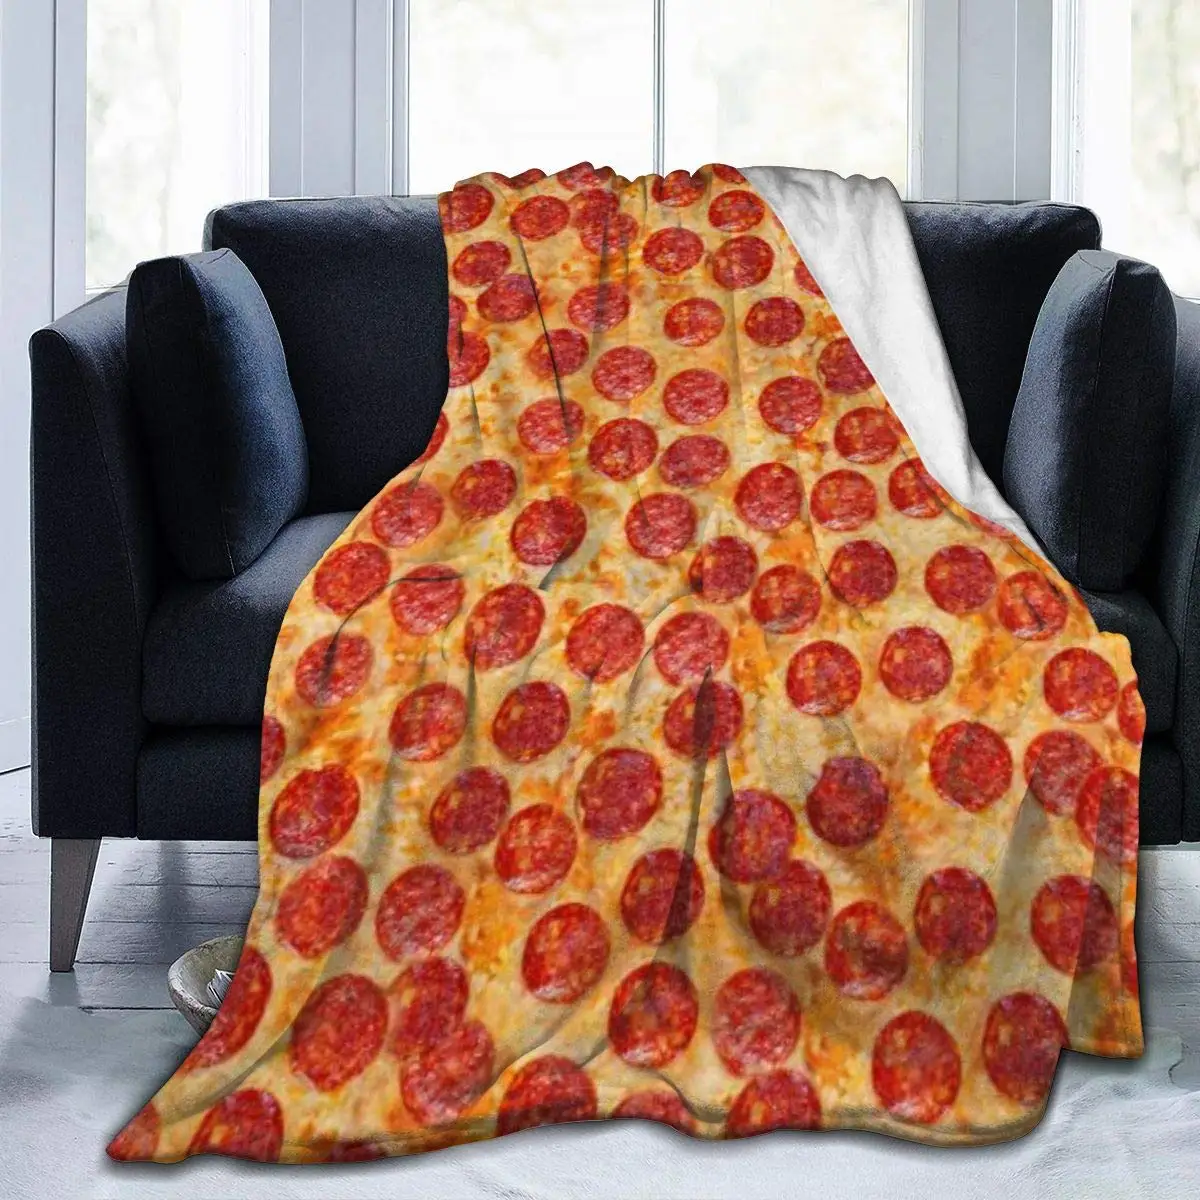 

Soft Food Blanket Pizza Noodles Lightweight Plush Flannel Quilt for Women Men Beach Couch Bed Sofa Throw Blanket Birthday Gift